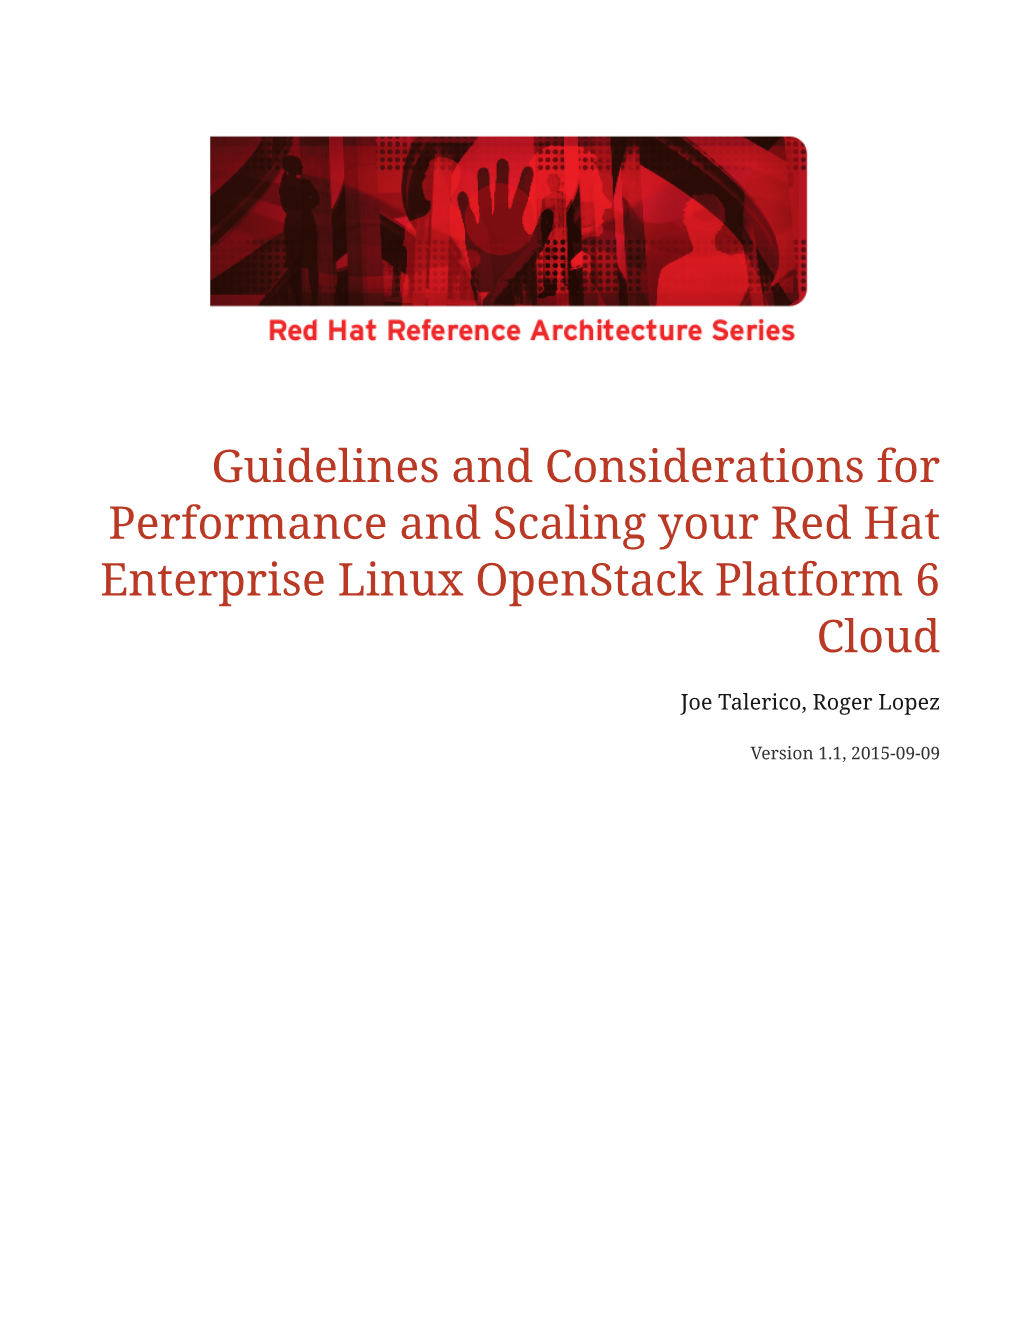 Guidelines and Considerations for Performance and Scaling Your Red Hat Enterprise Linux Openstack Platform 6 Cloud